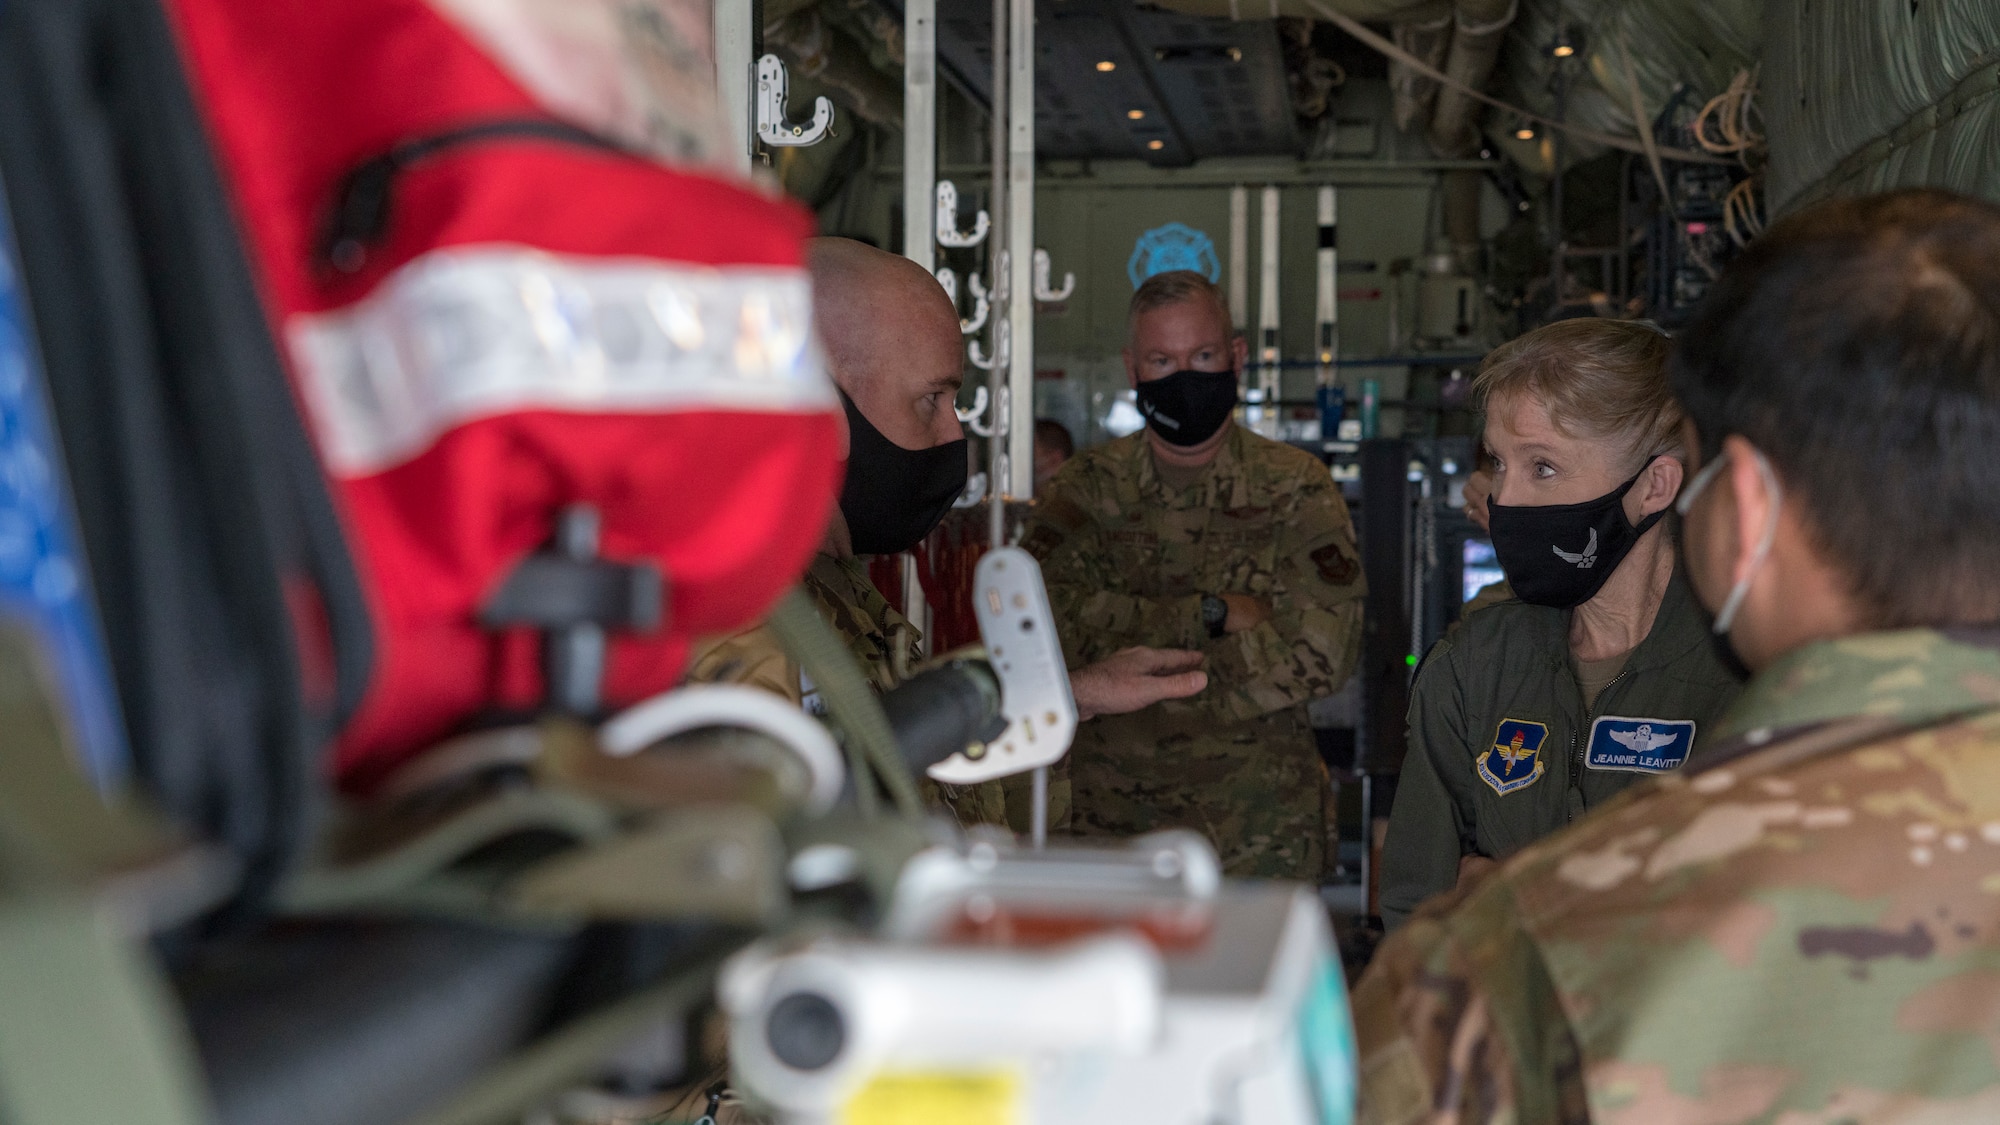 Maj. Gen. Jeannie M. Levitt, director of operations and communications for the Air and Education Training Command at Joint Base San Antonio-Randolph, Texas, learns about the 36th Aeromedical Evacuation Squadron mission from Master Sgt. Ryan McClellan during a visit at Keesler Air Force Base, Miss., March 19, 2021. After joining the Air Force in 1992, Leavitt became the branch's first female fighter pilot in 1993. She visited the 81st Training Wing and the Air Force Reserve's 403rd Wing, and she spoke to members of Team Keesler during an event recognizing International Women's History Month. (U.S. Air Force photo by Staff Sgt. Kristen Pittman)